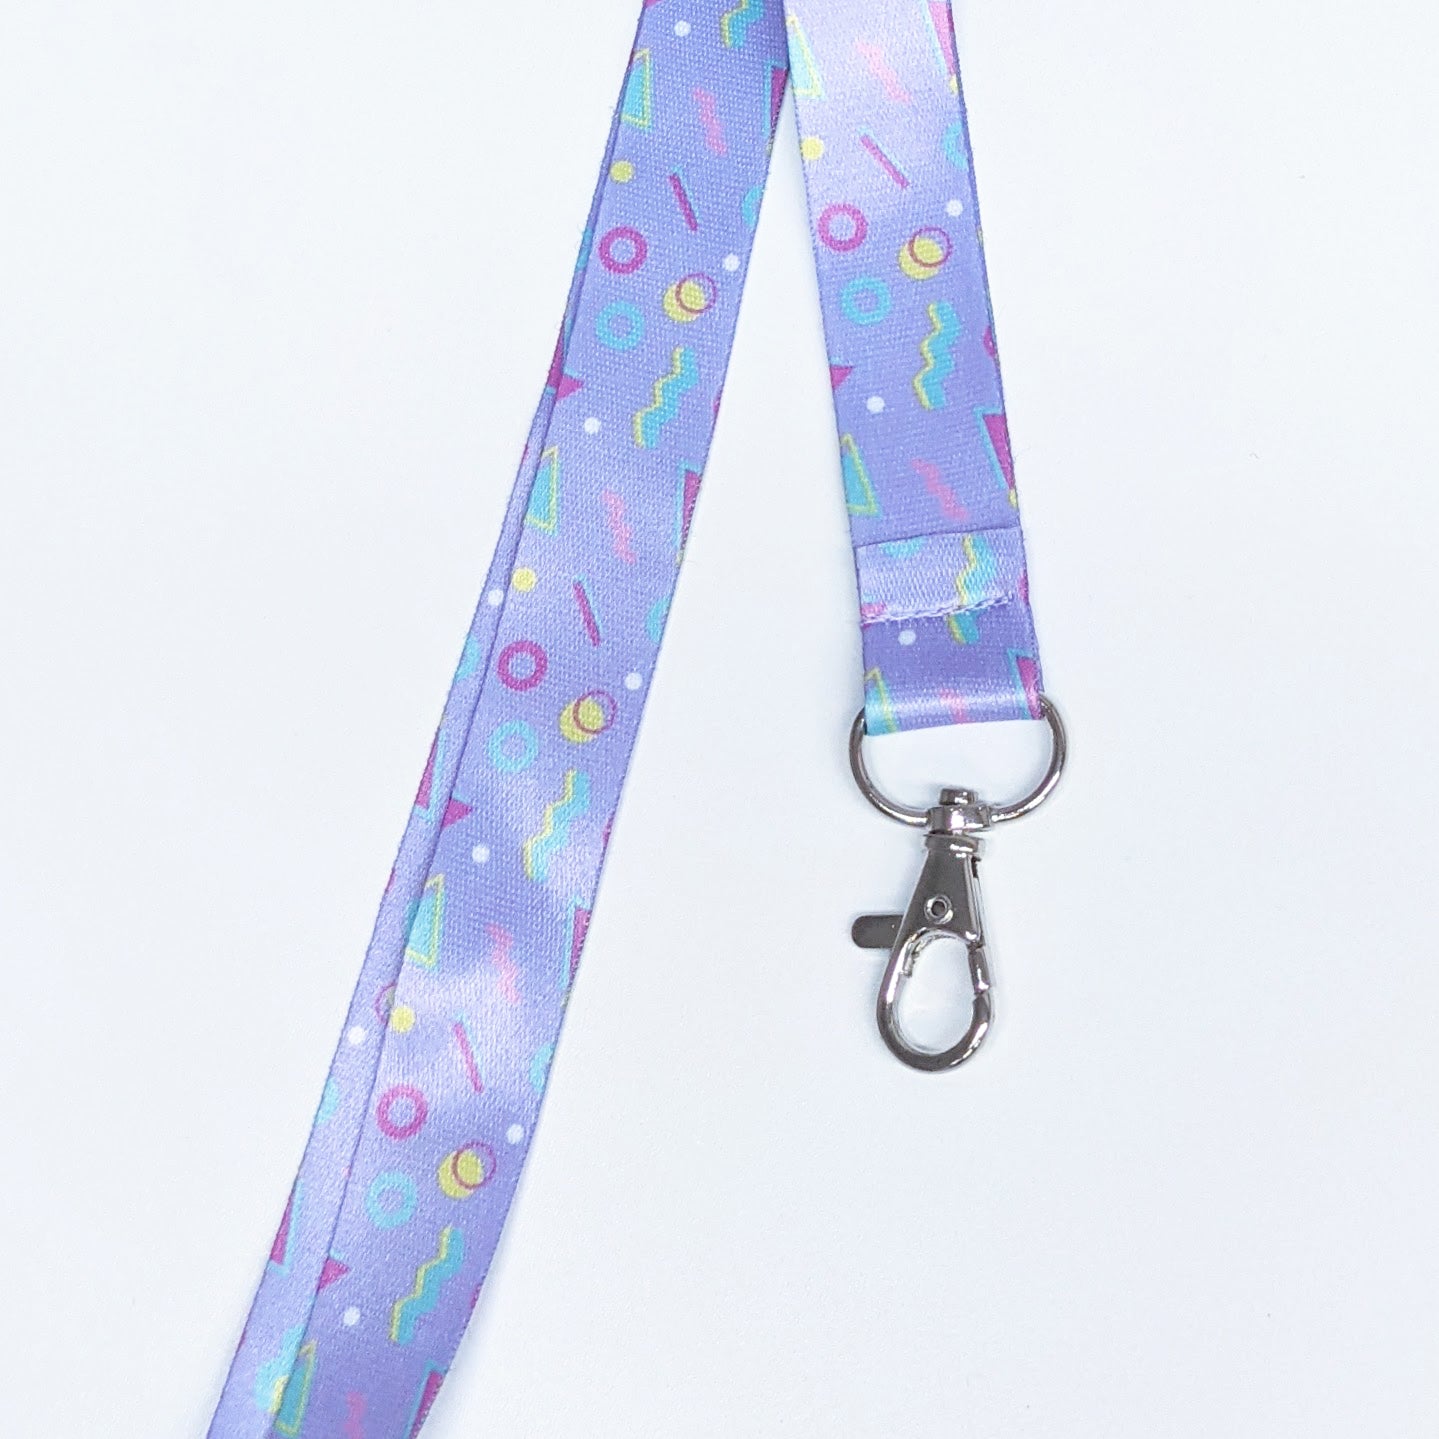 Retro Arcade 90's Carpet Lanyard with Silver Lobster Clasp | Cute Lanyard | Cute Key Holder | by Tawny Illustrations